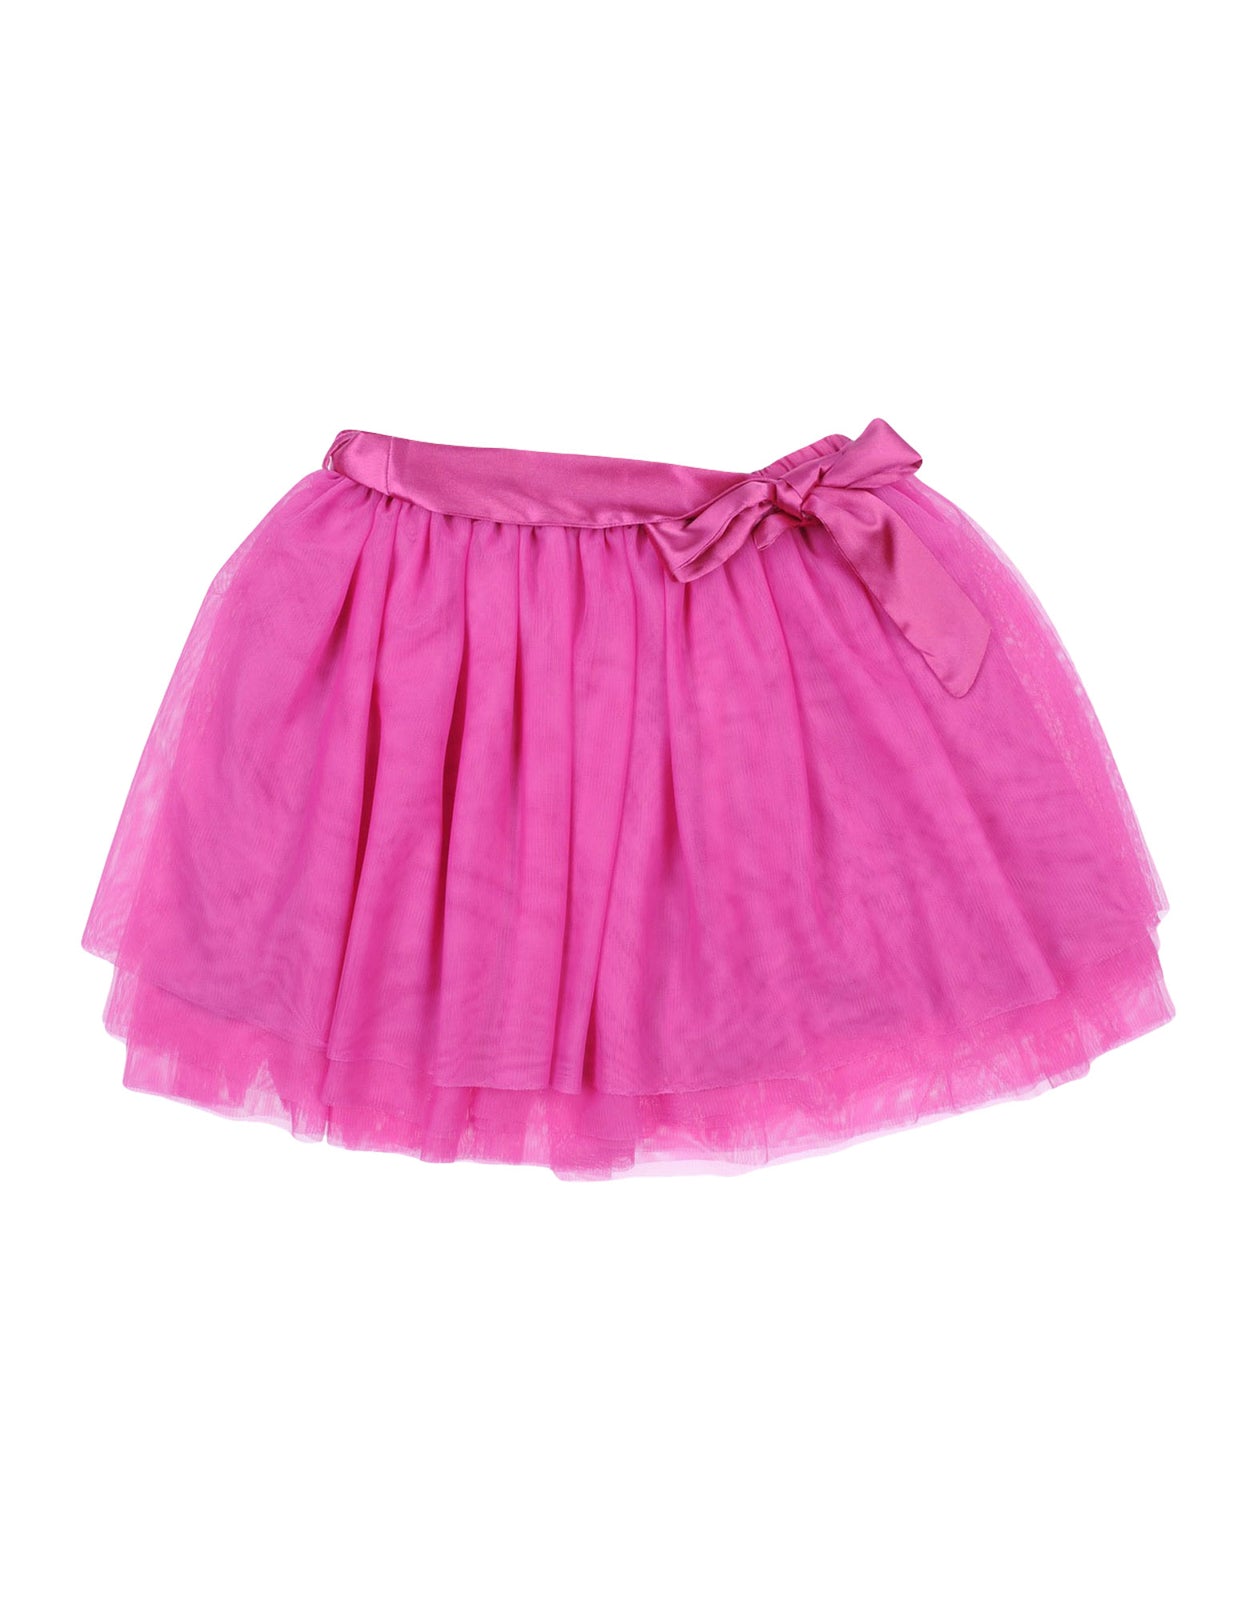 SO TWEE By MISS GRANT Tulle Tutu Skirt 44 / 14Y / 164-170CM Belted Layered gallery main photo